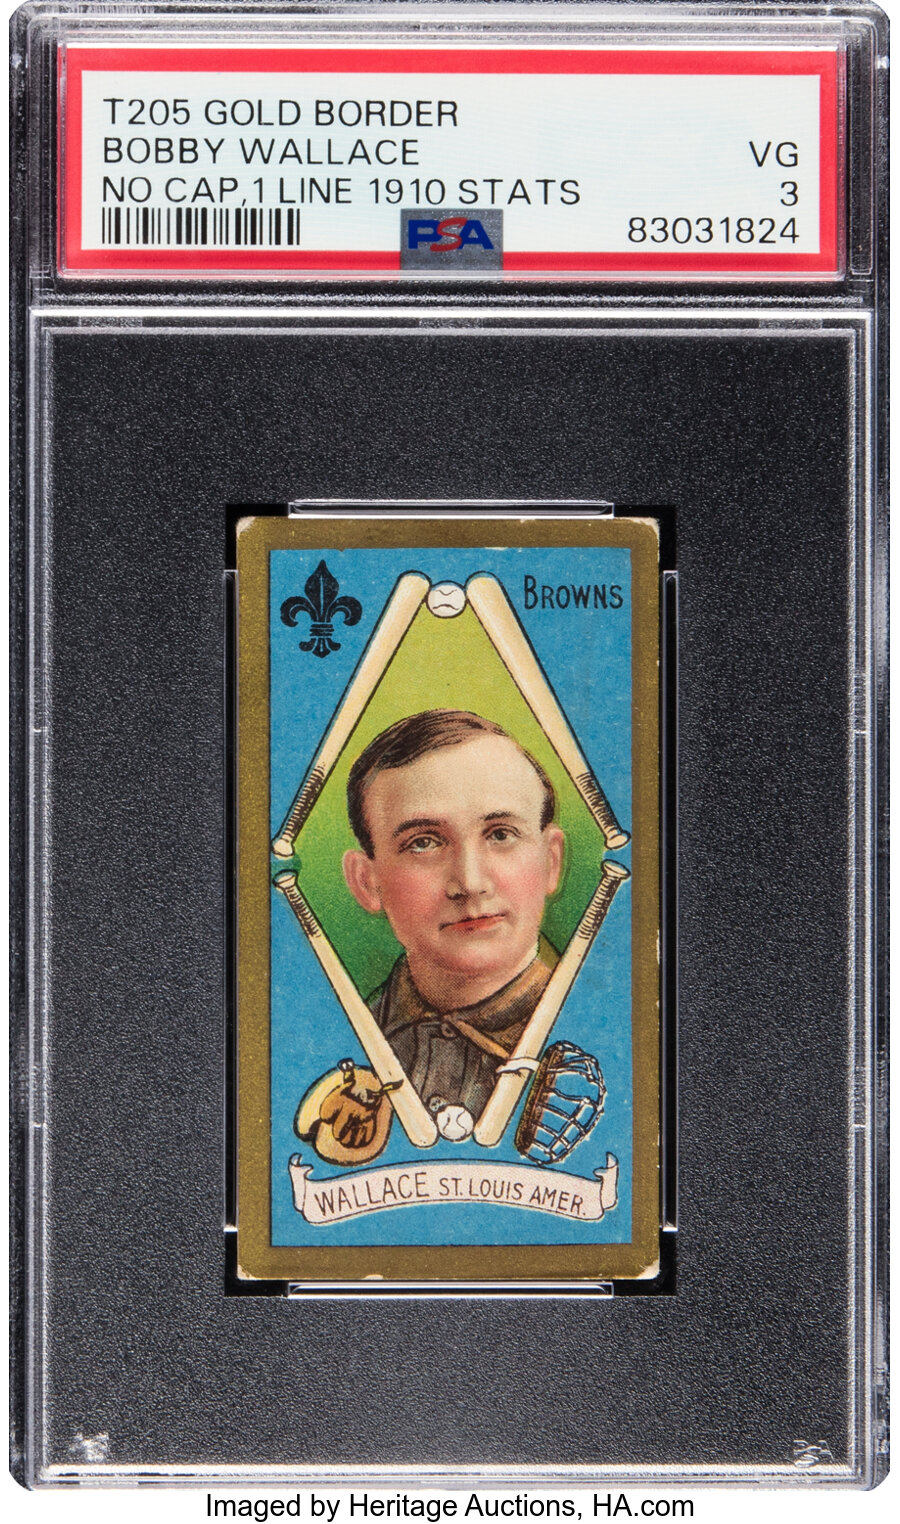 1911 T205 Hassan Bobby Wallace (No Cap-One Line of 1910 Stats) PSA VG 3 -- From The Ramsburg Collection